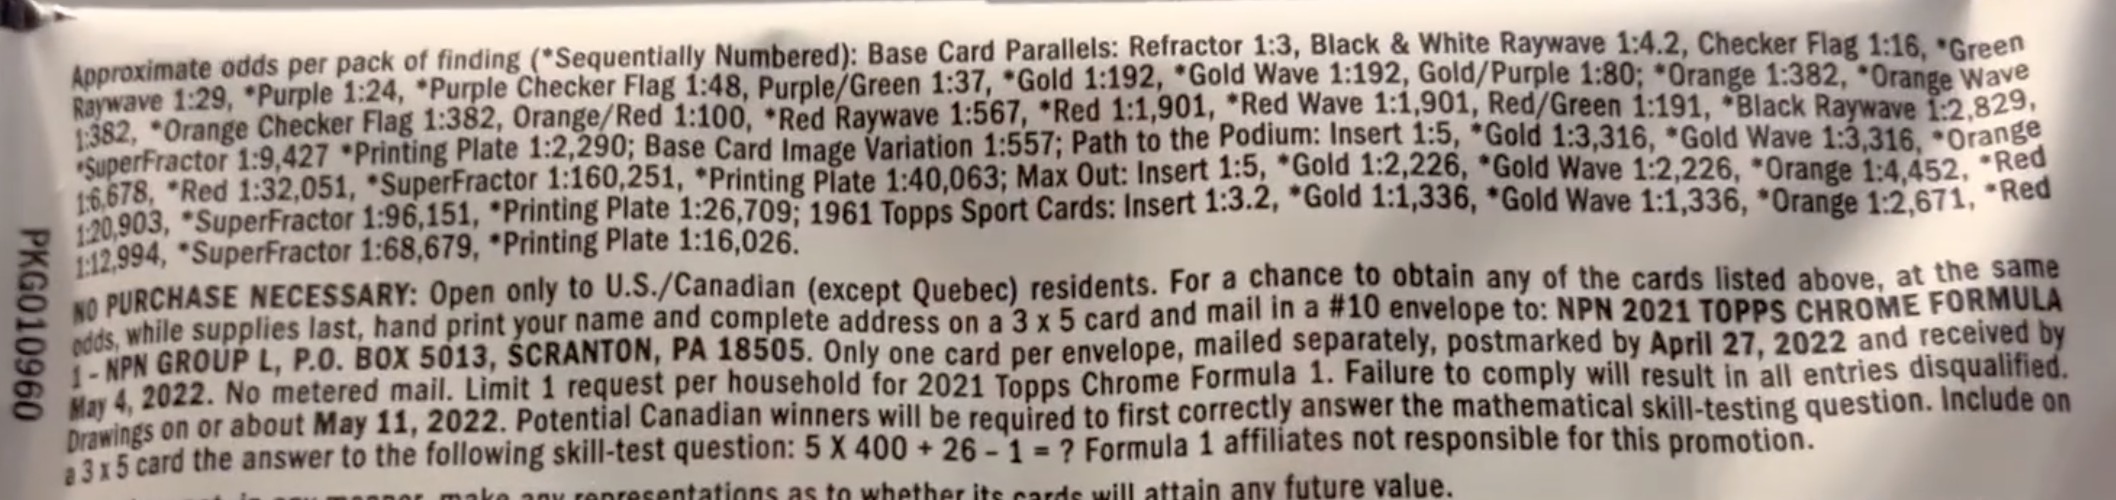 2021 Topps Chrome Formula 1 Racing Cards - Hobby Box - No Purchase Necessary (NPN) Information